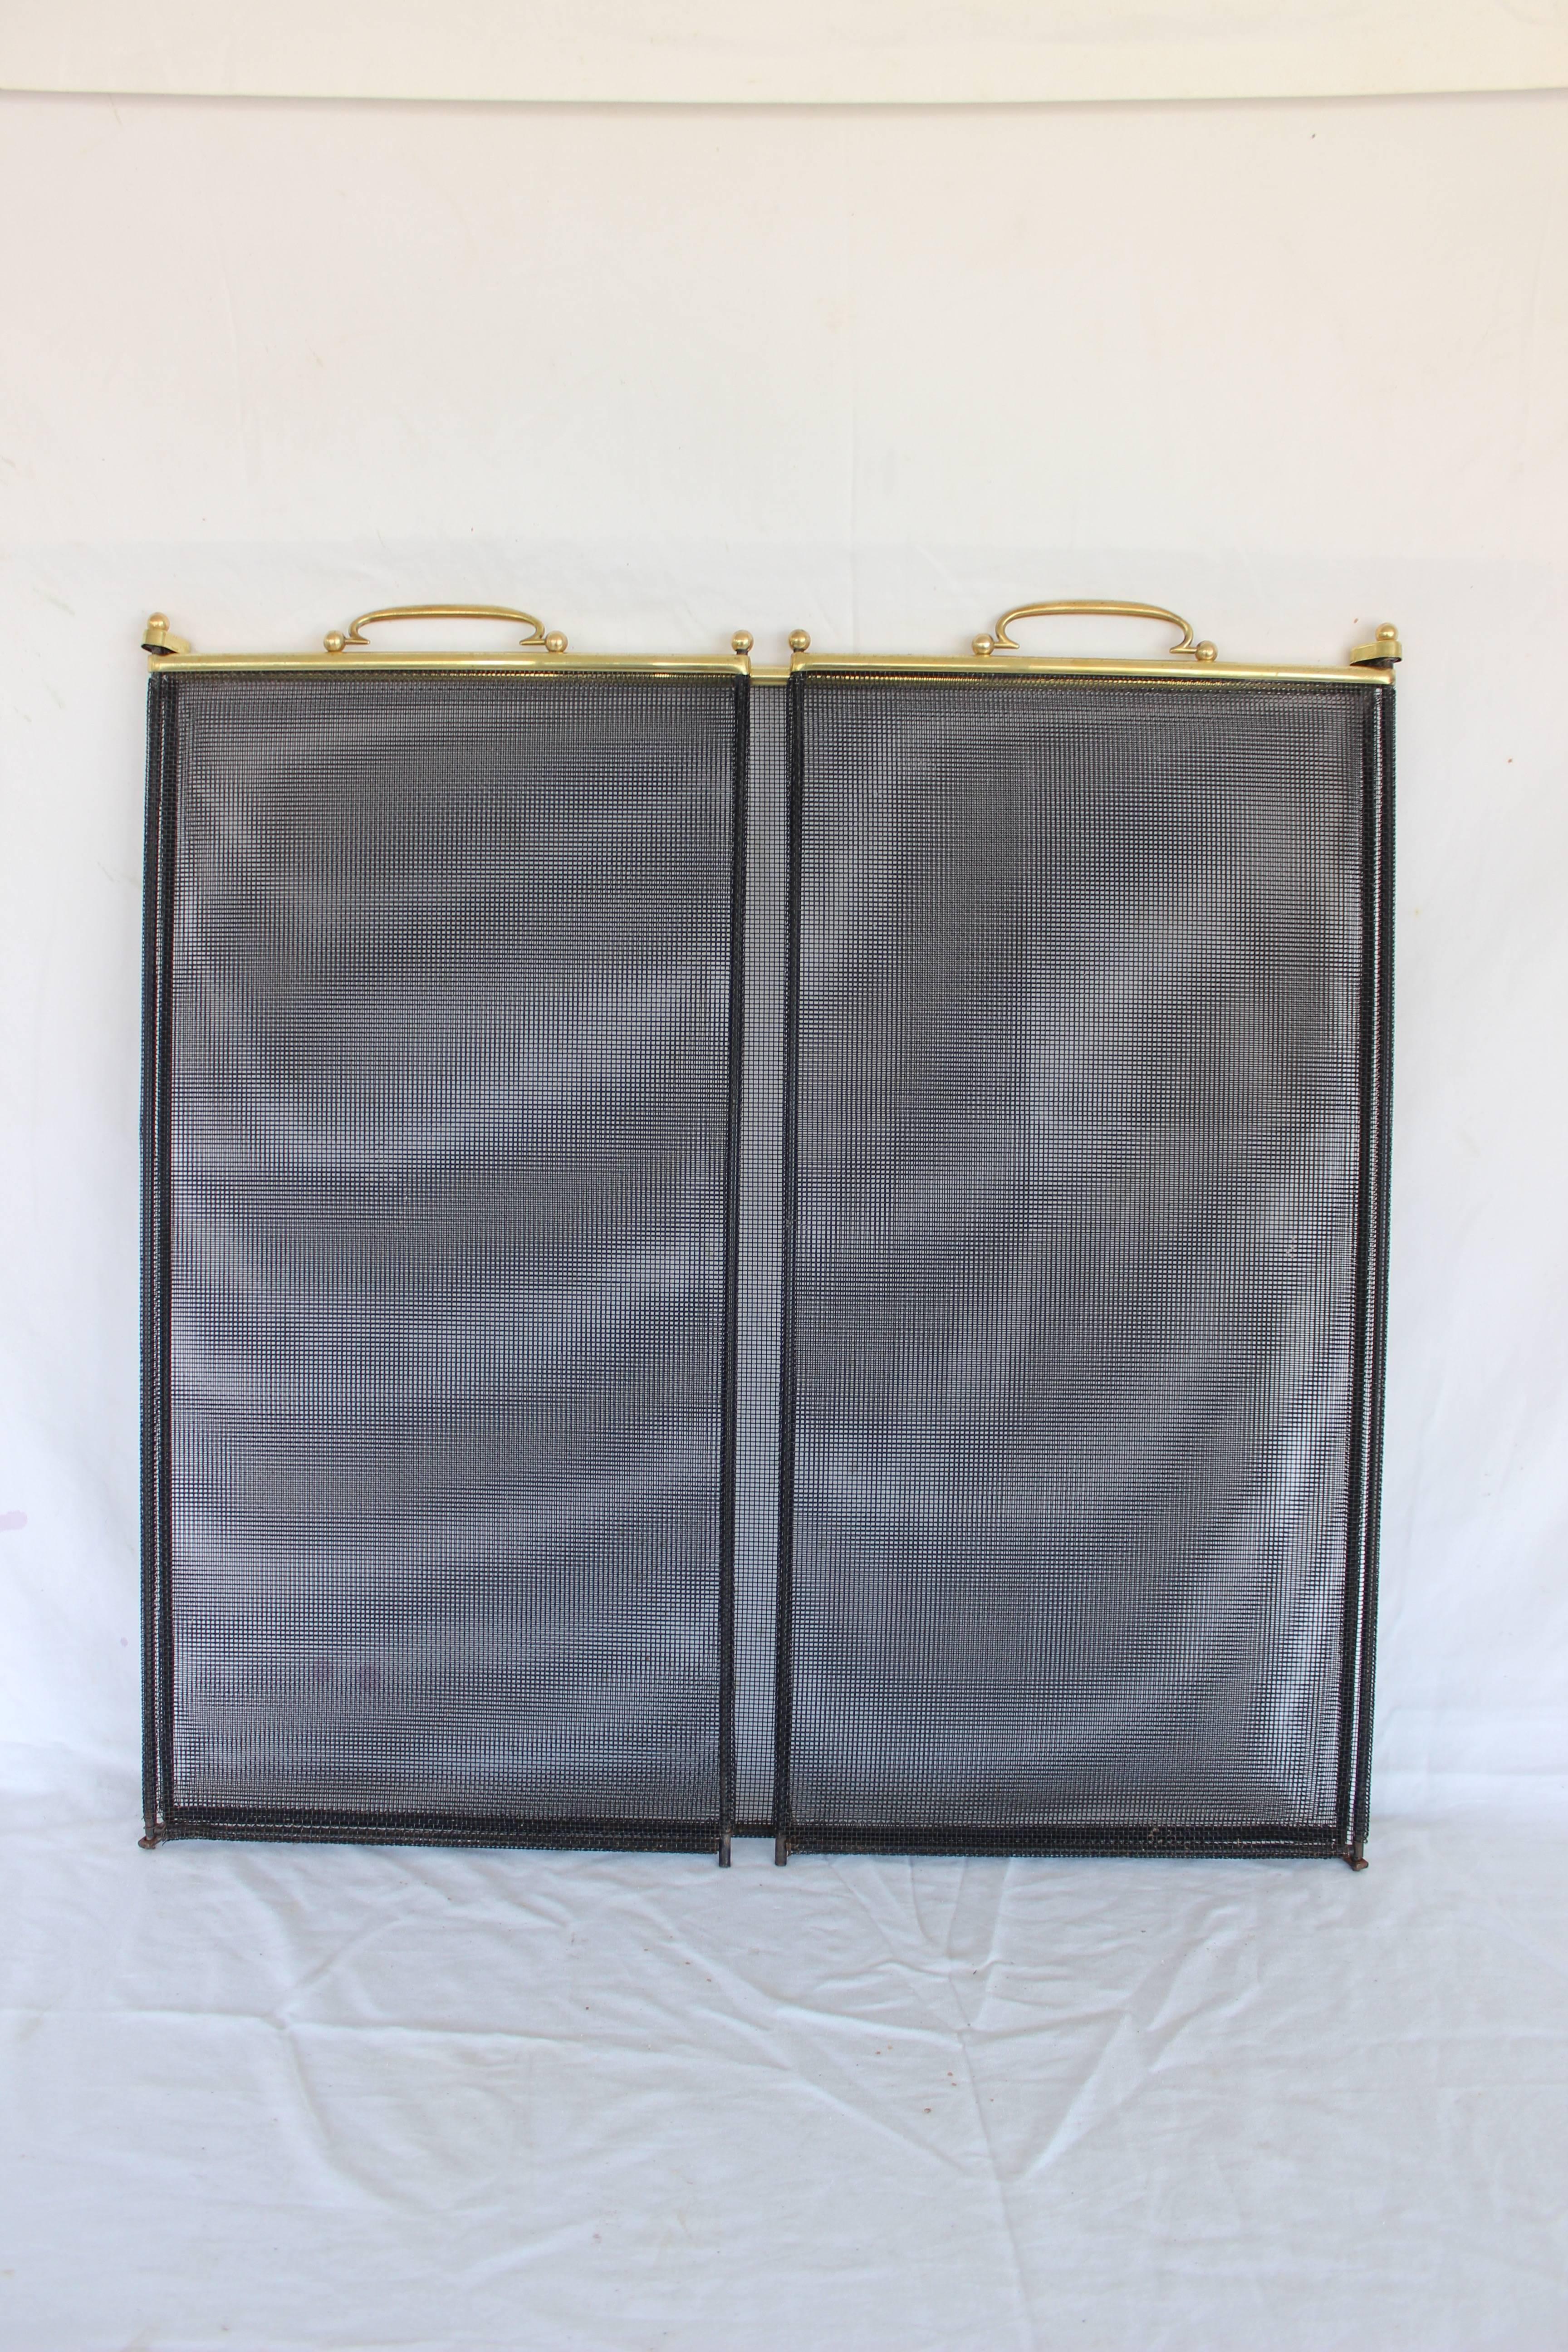 Brass and Metal Fireplace Screen 3